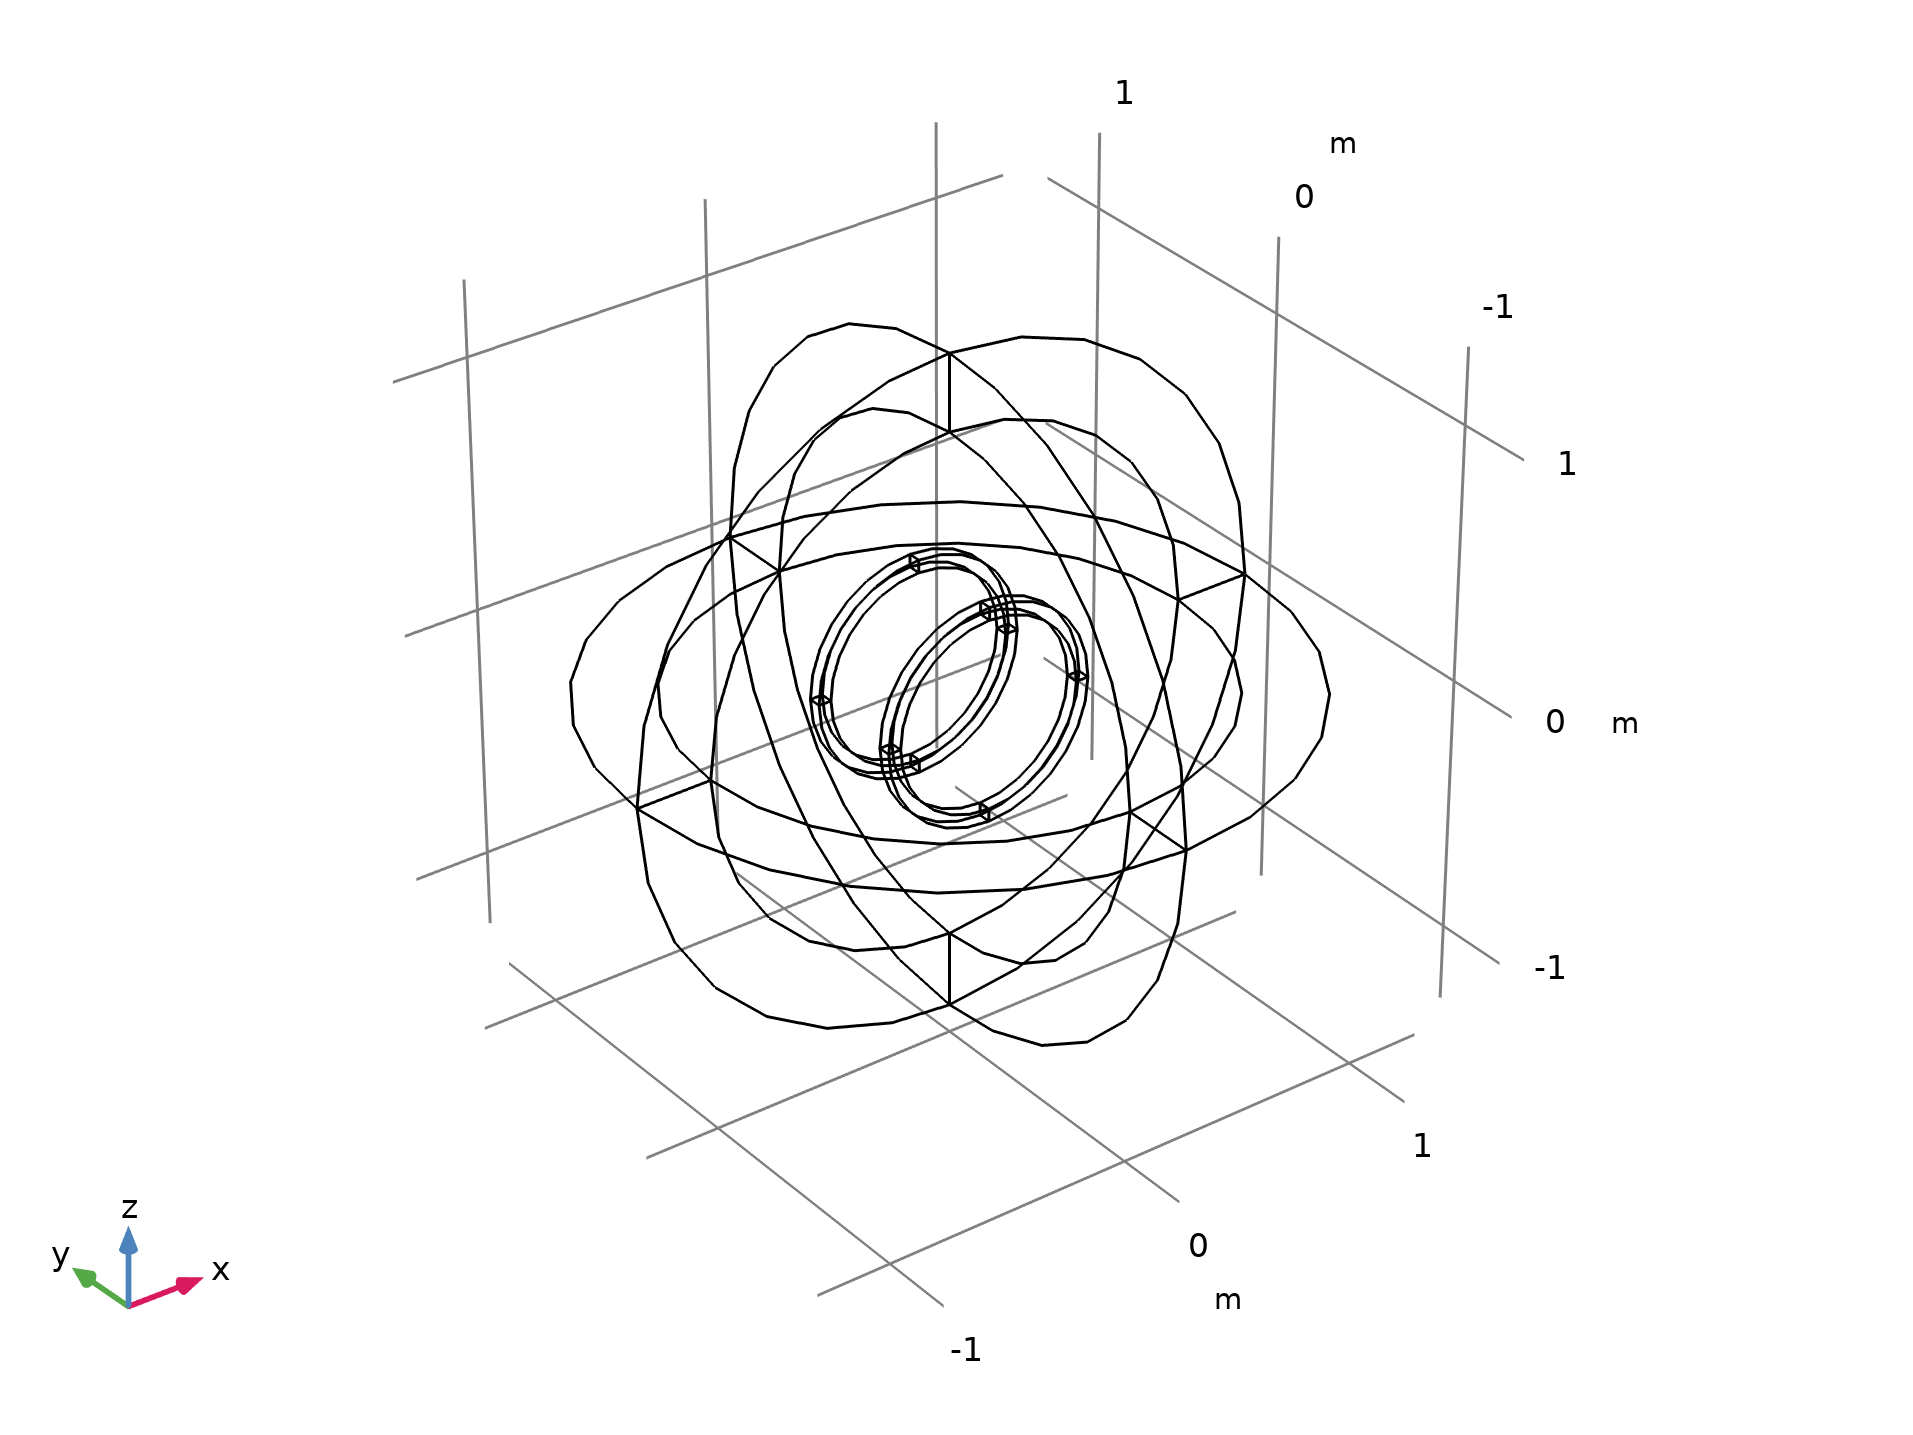 A geometry of a Helmholtz coil model used to compute the spatial derivative of the magnetic field, with the outer region modeled as an infinite element.